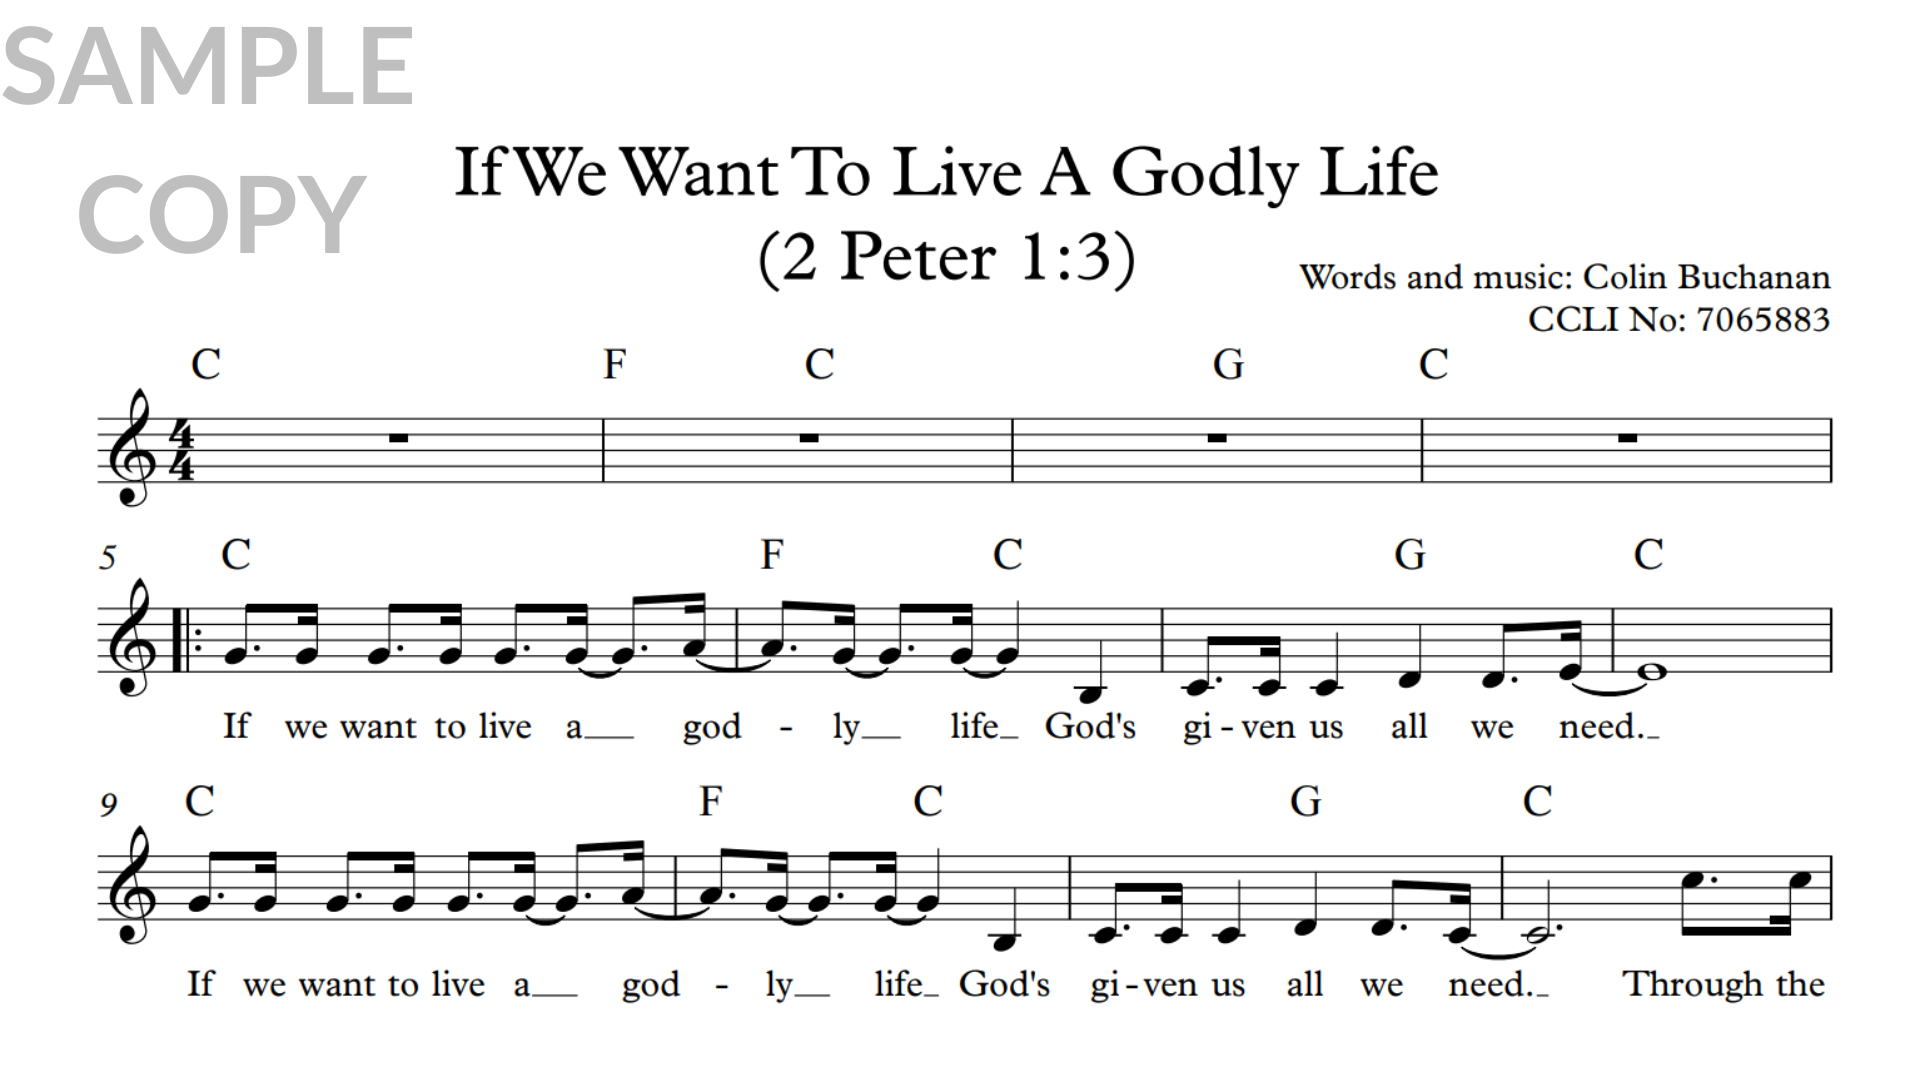 If We Want To Live A Godly Life (2 Peter 1:3)